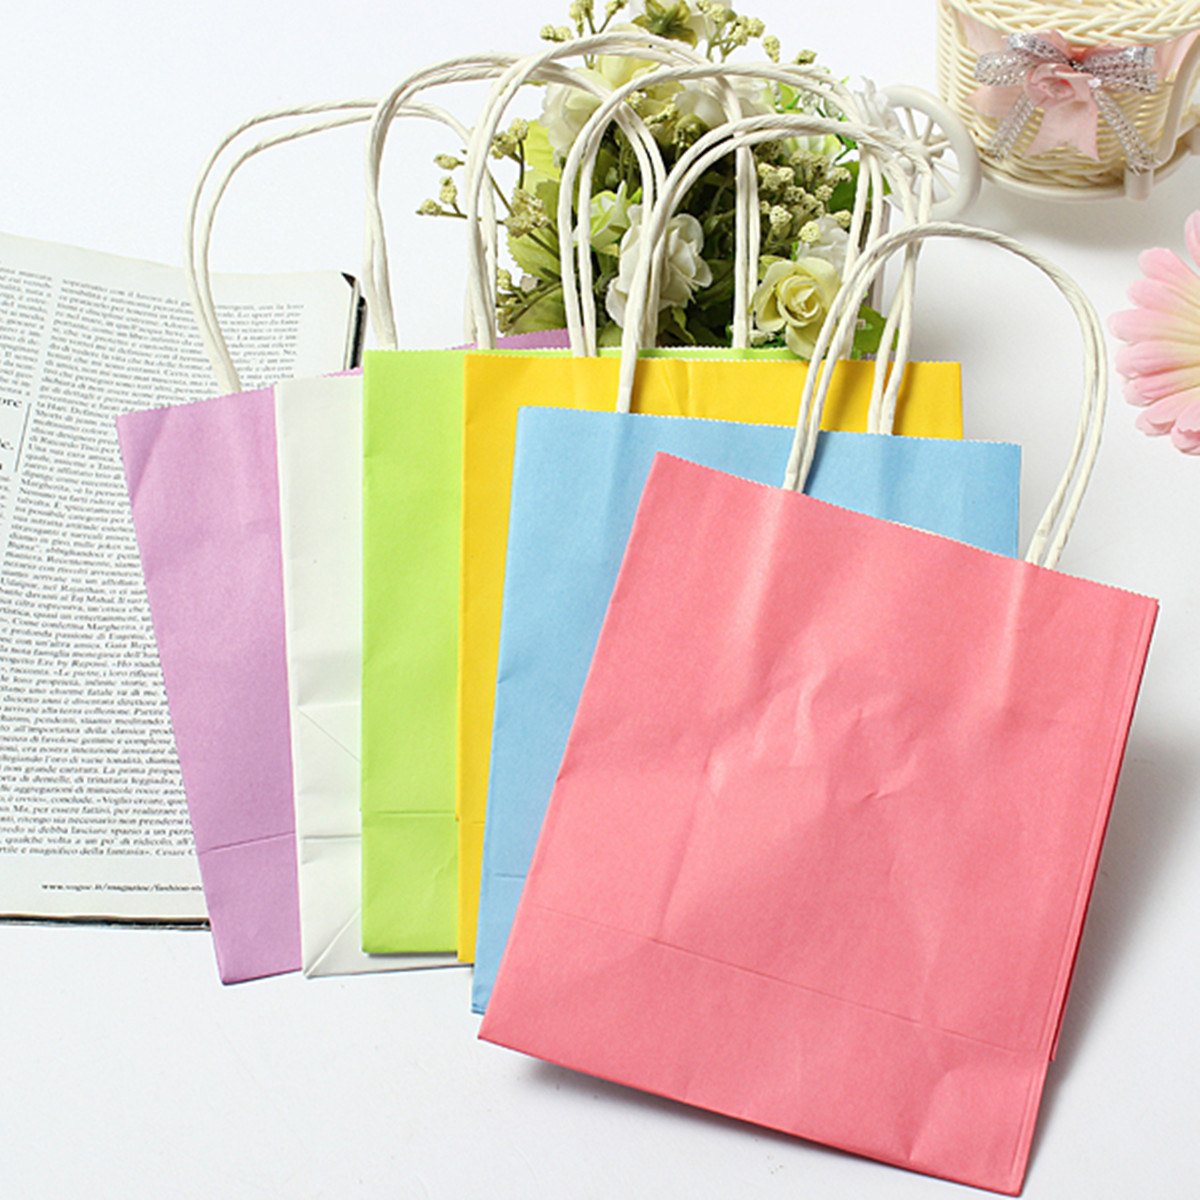 Colorful-Kraft-Paper-Gift-Bag-Wedding-Party-Handle-Paper-Gift-Bags-987091-2